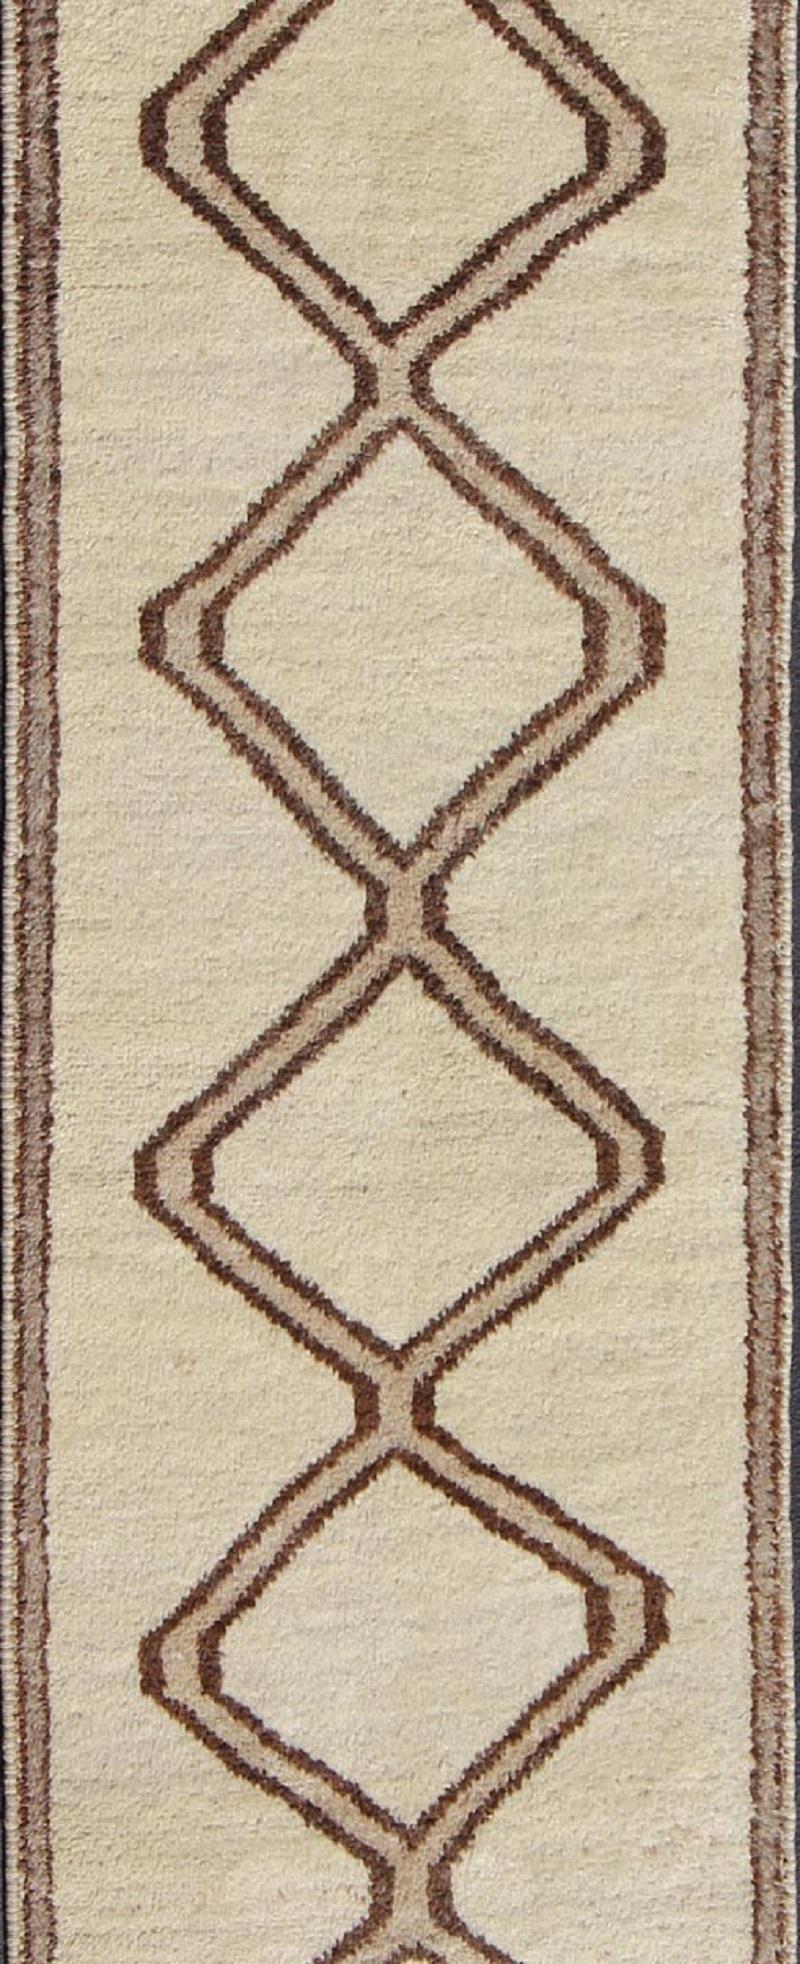 Hand-Knotted Brown, Tan and Cream Vintage Turkish Tulu Runner with Minimal, Modern Design